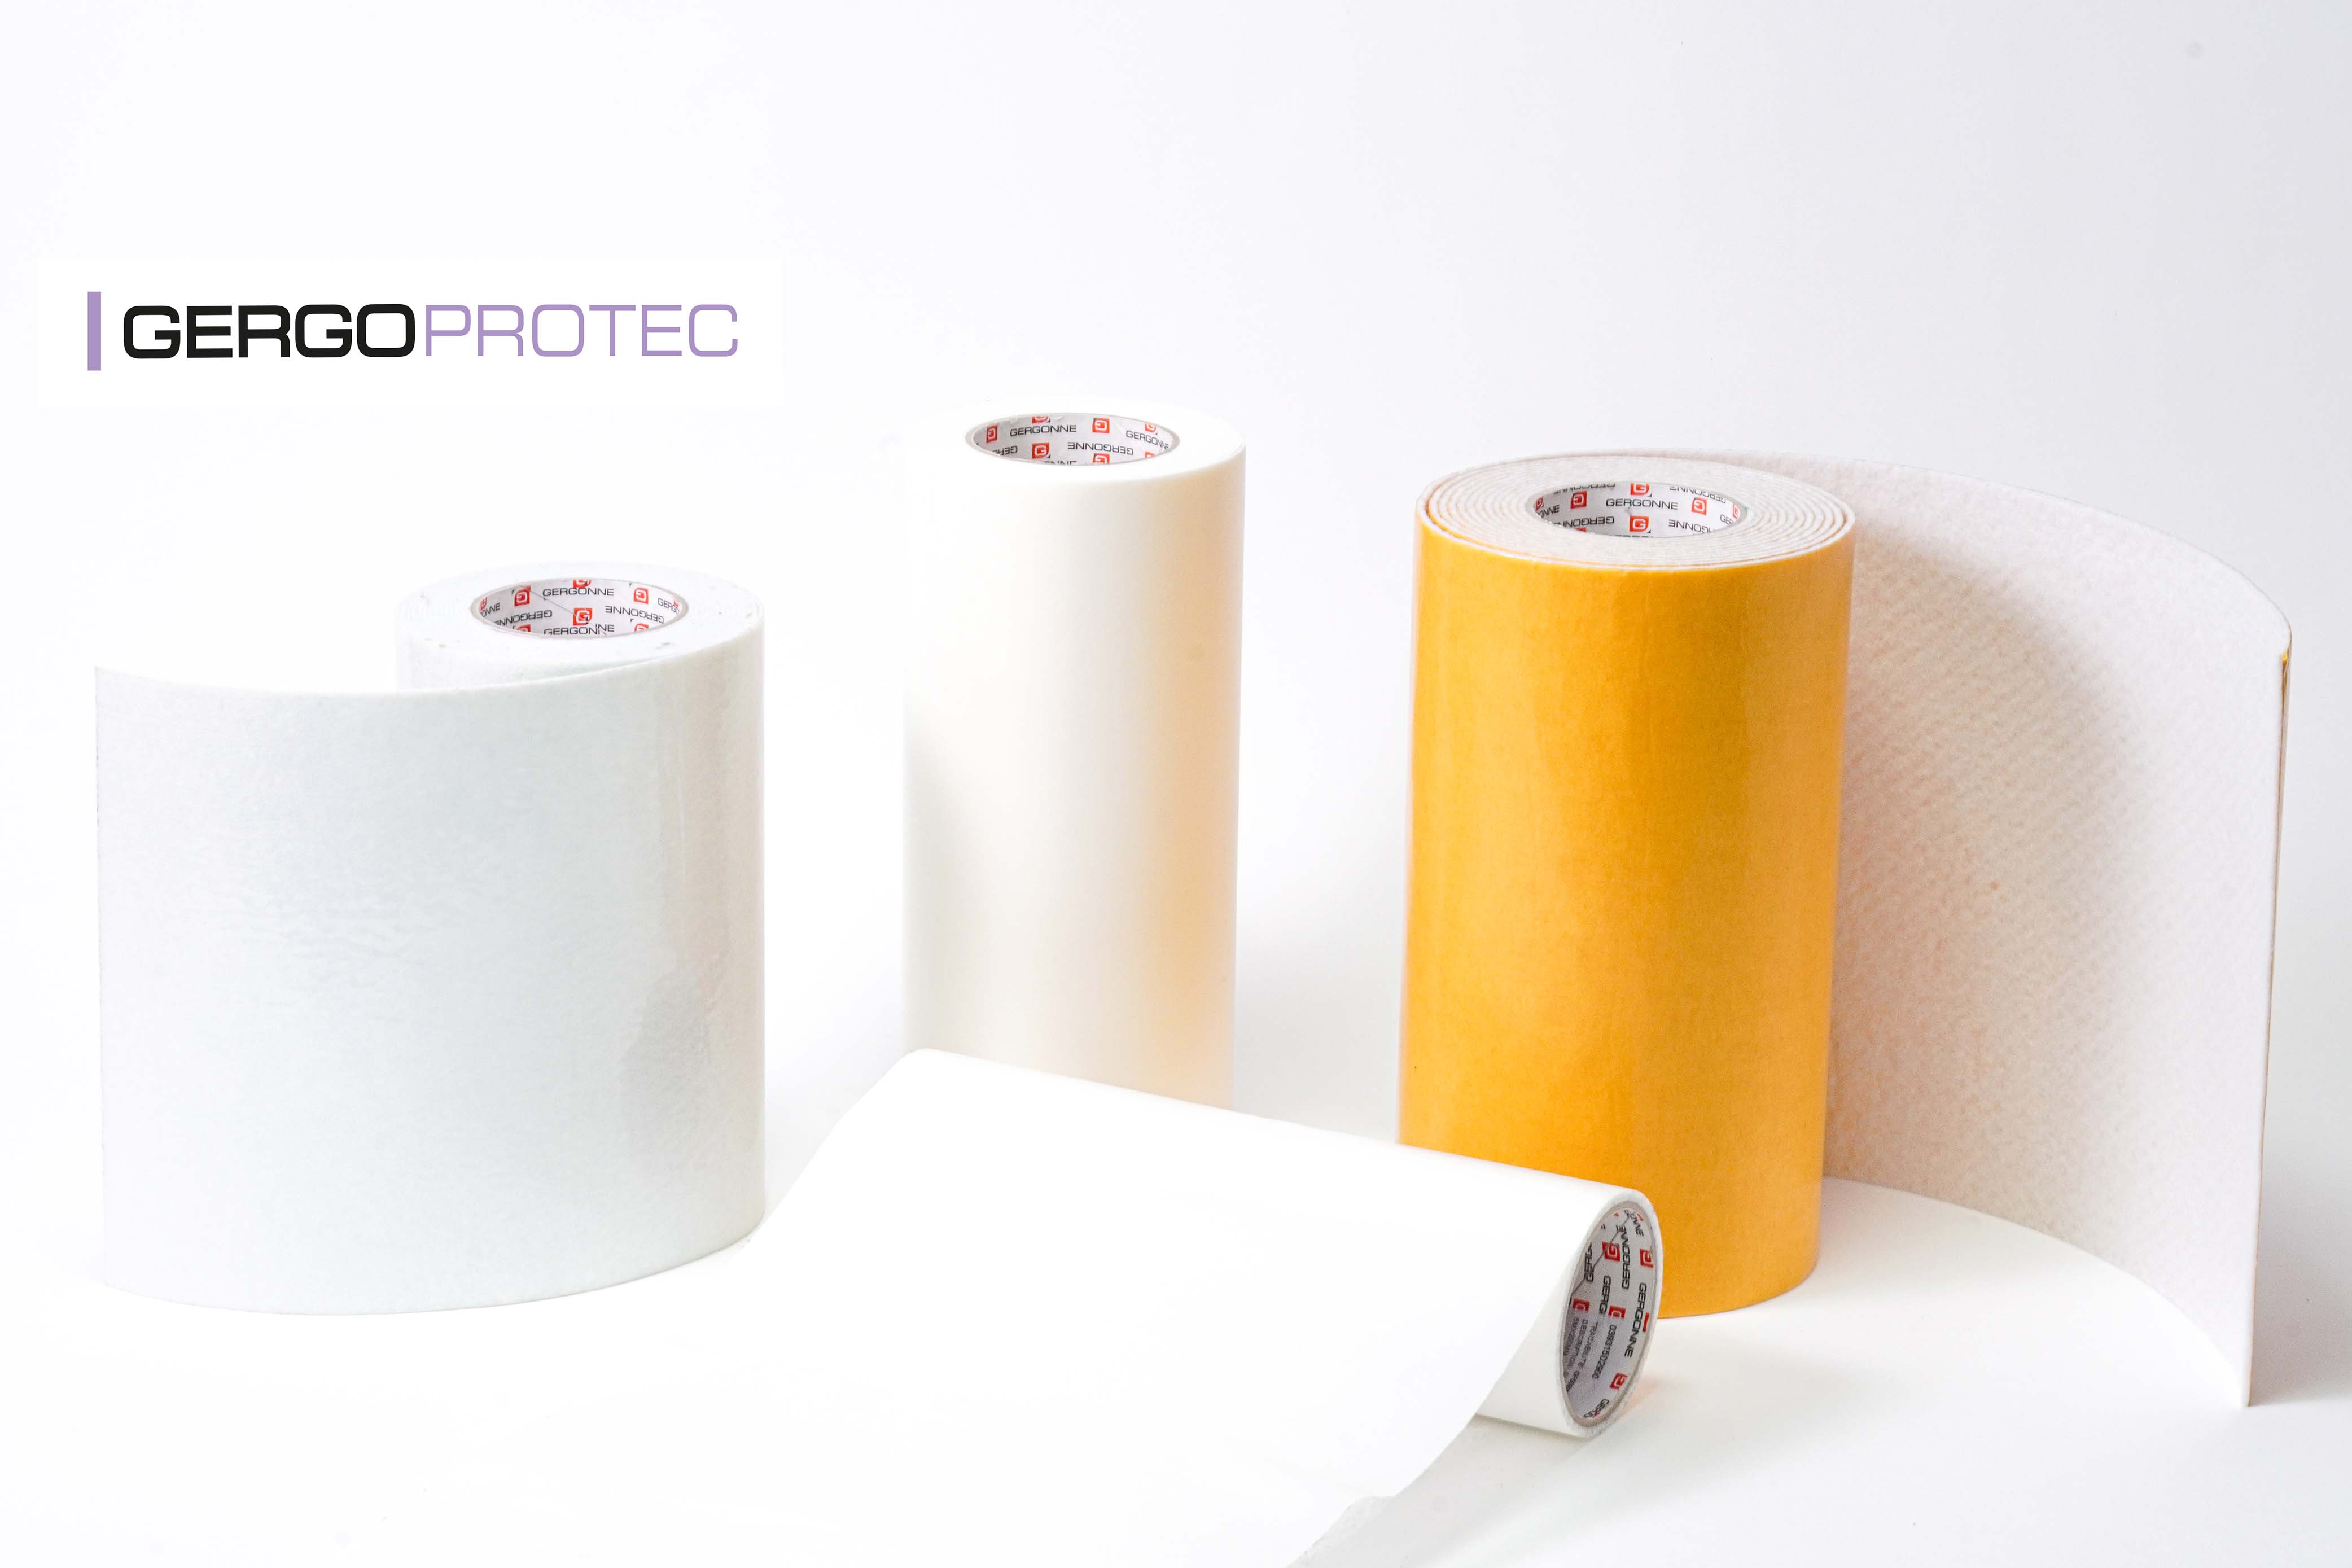 OUR PROTECTIVE ADHESIVE SOLUTIONS FOR ALL YOUR SURFACES